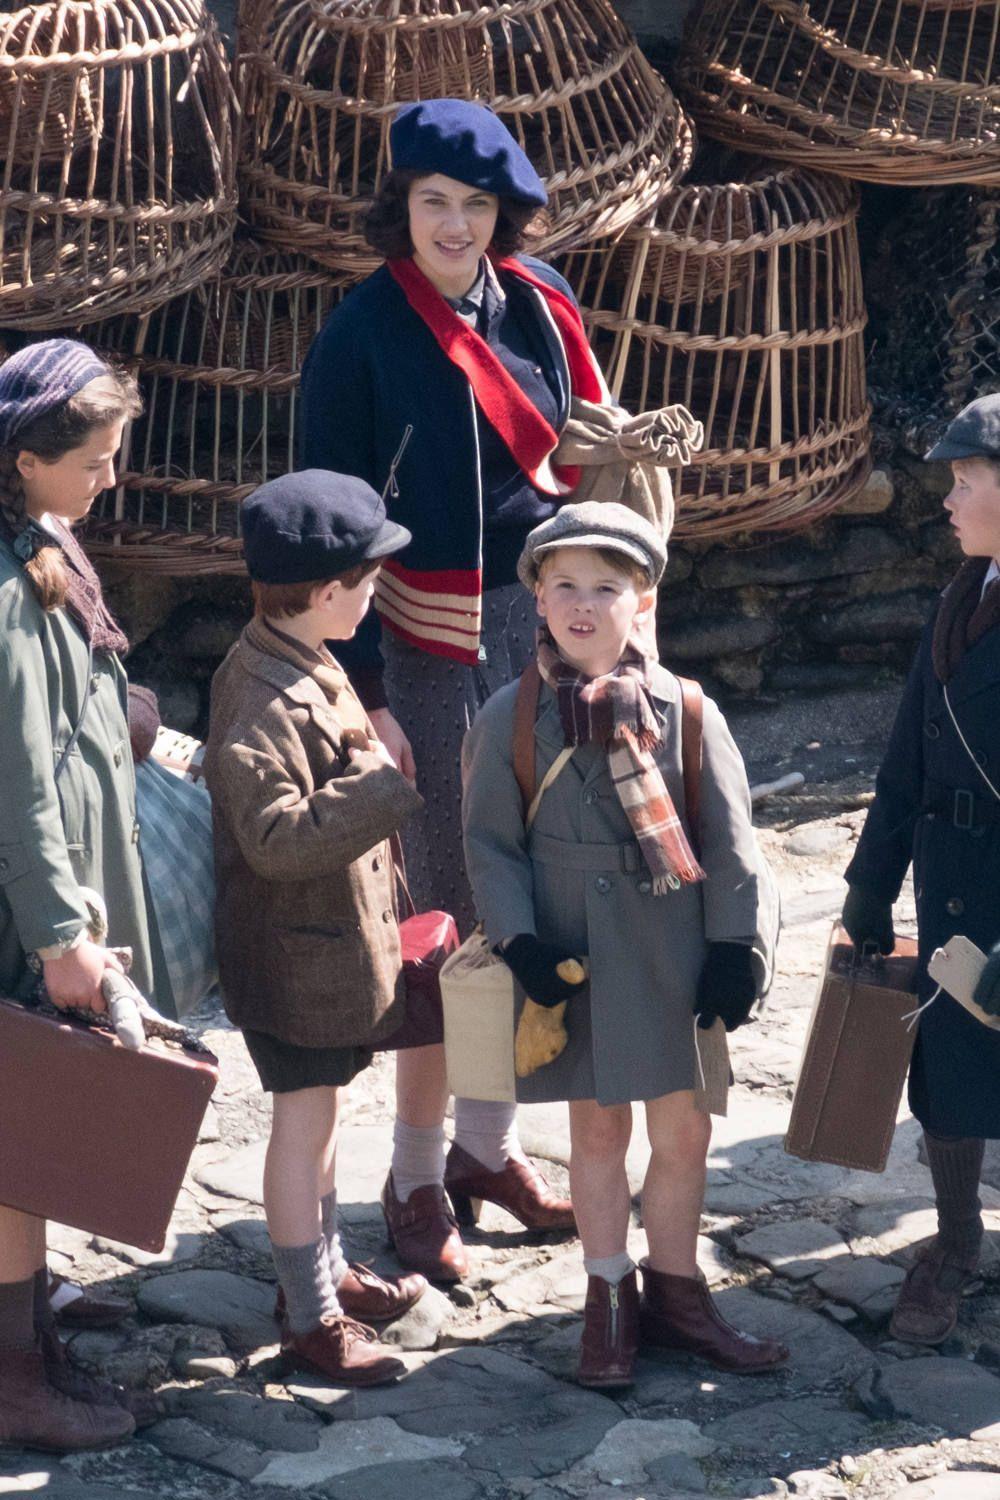 Guernsey. Filming The Guernsey Literary and Potato Peel Pie Society